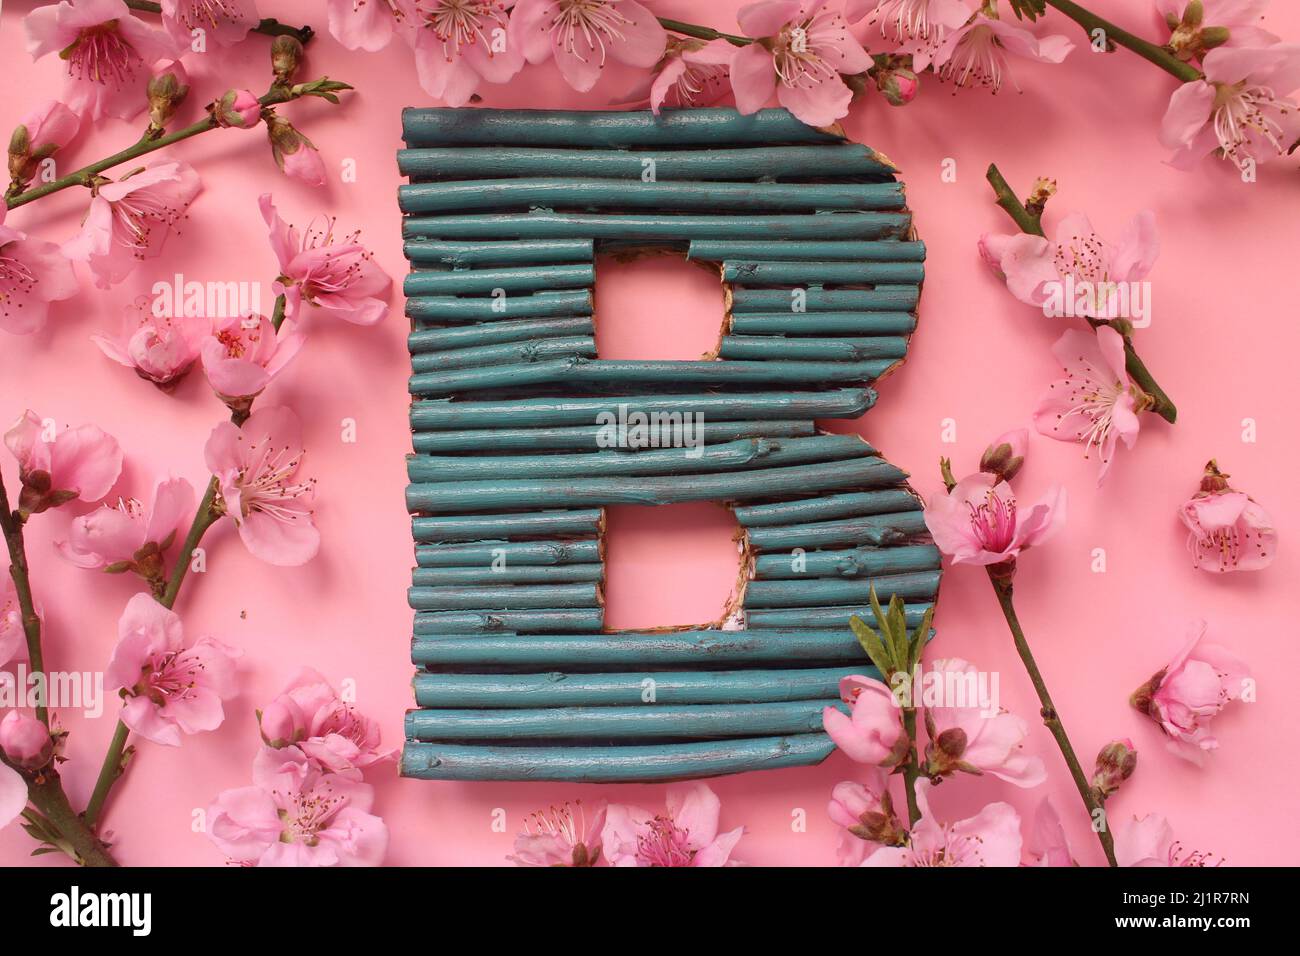 Letter B, handmade with twig blue letter b between flowers in spring time.Top view and isolated on pink background. Stock Photo